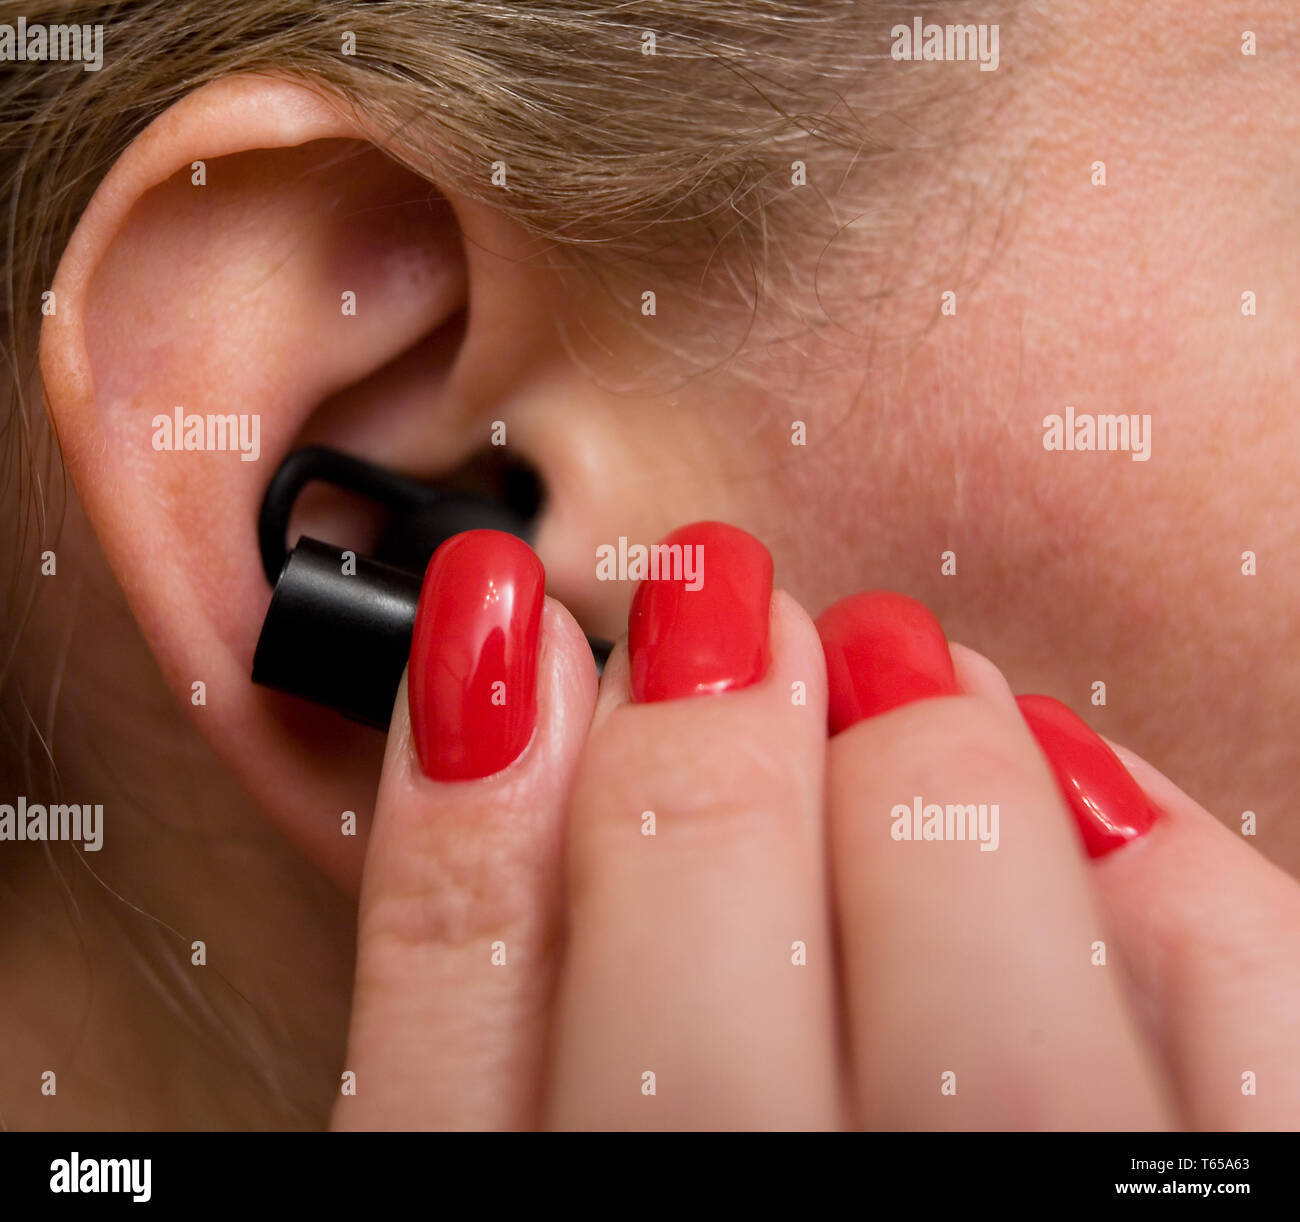 Beautiful well-groomed female fingers insert a headset into your ear. Close-up. Stock Photo